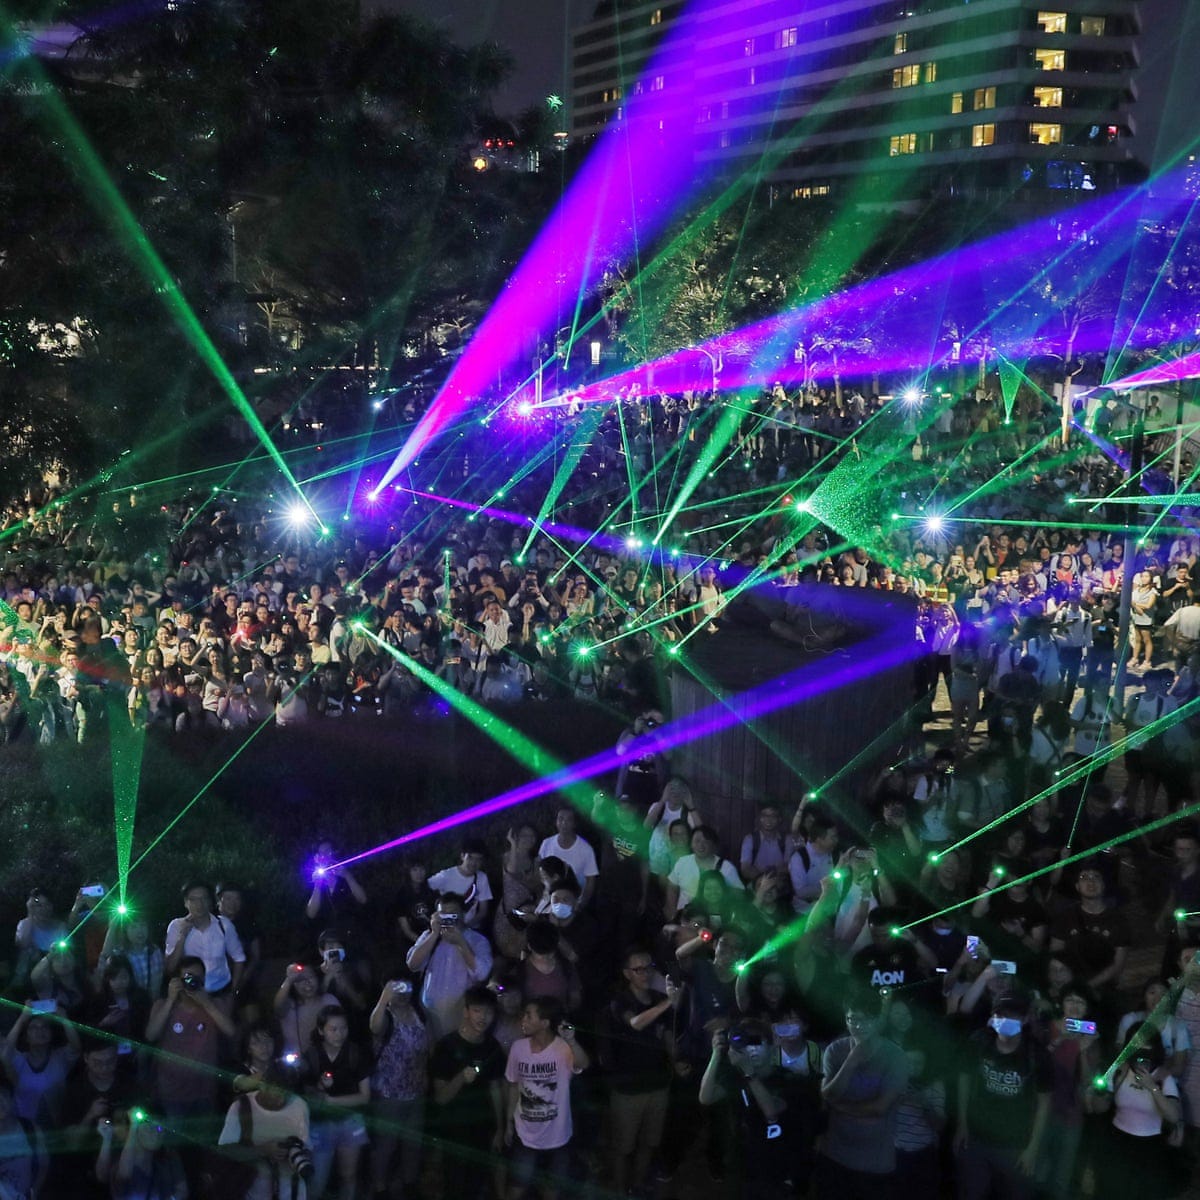 No tears, no blood': Hongkongers stage huge laser show to protest against  arrests | Hong Kong | The Guardian